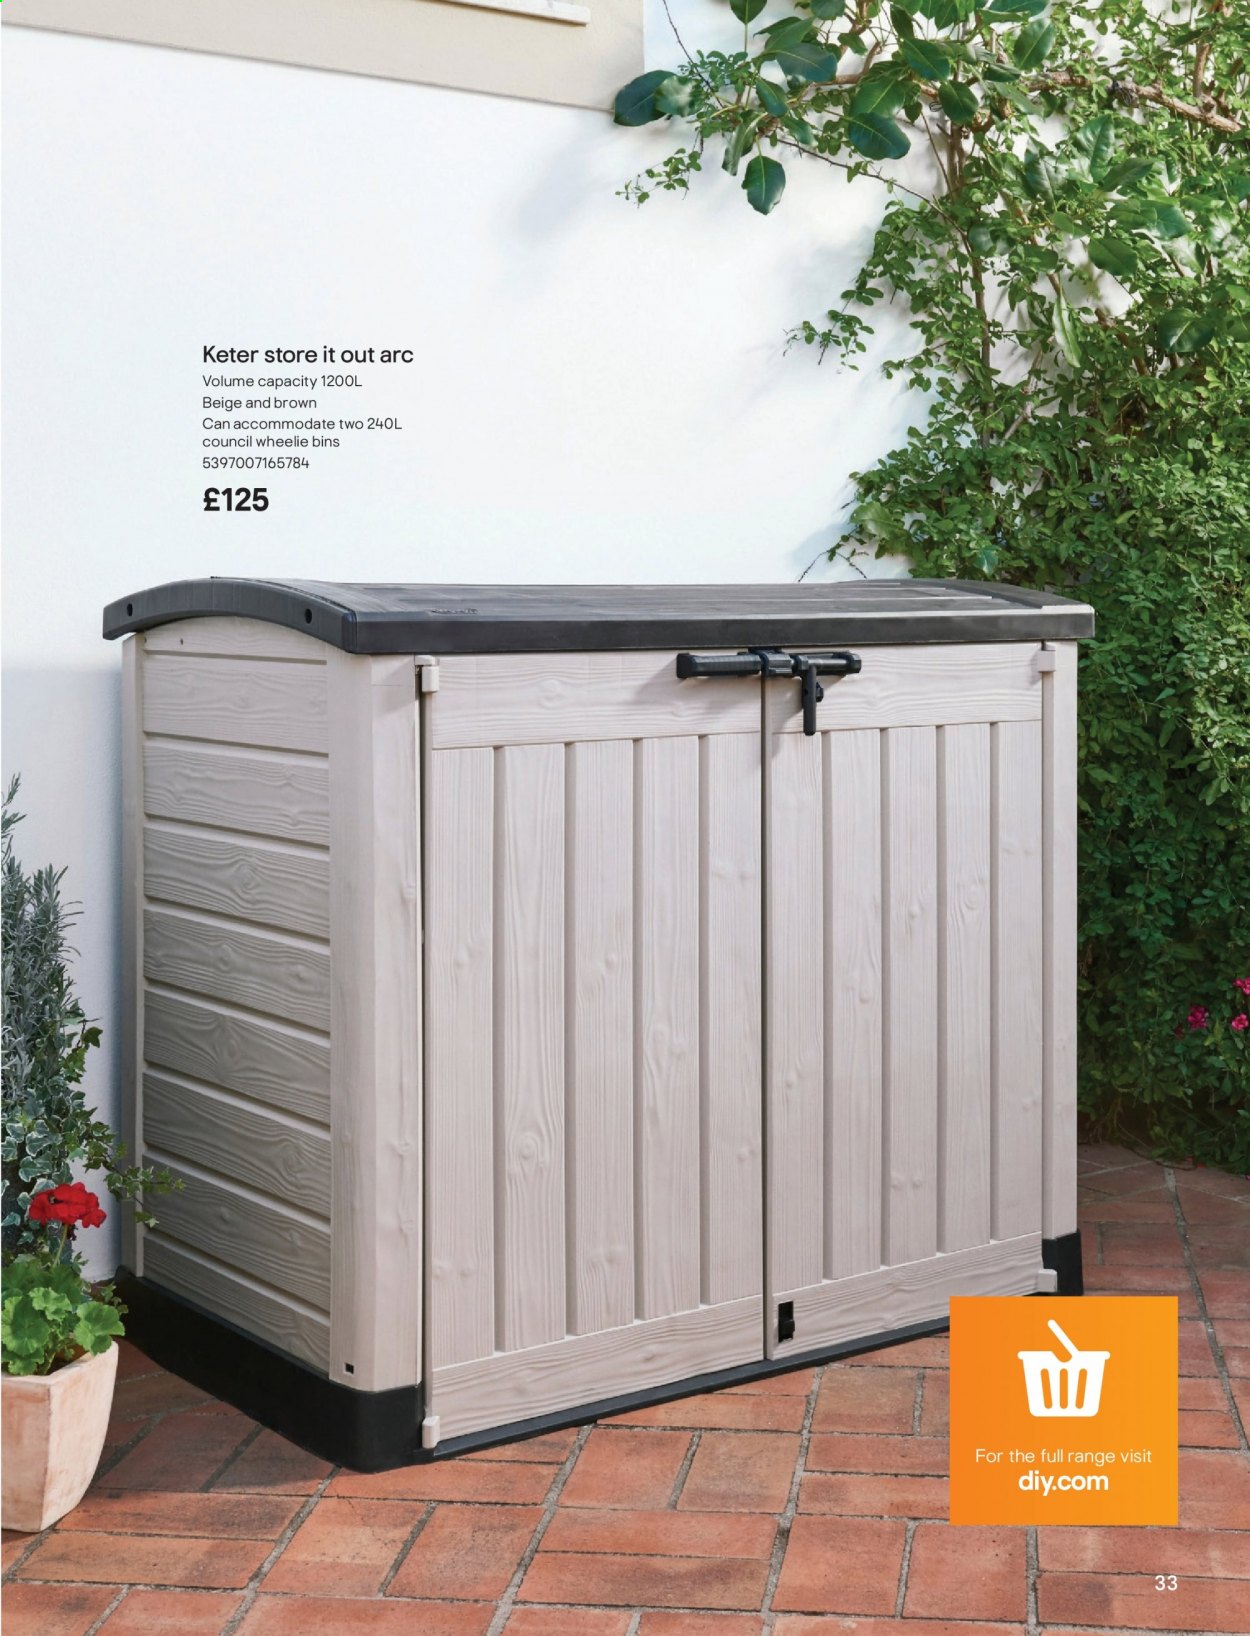 B&Q offer . Page 33.